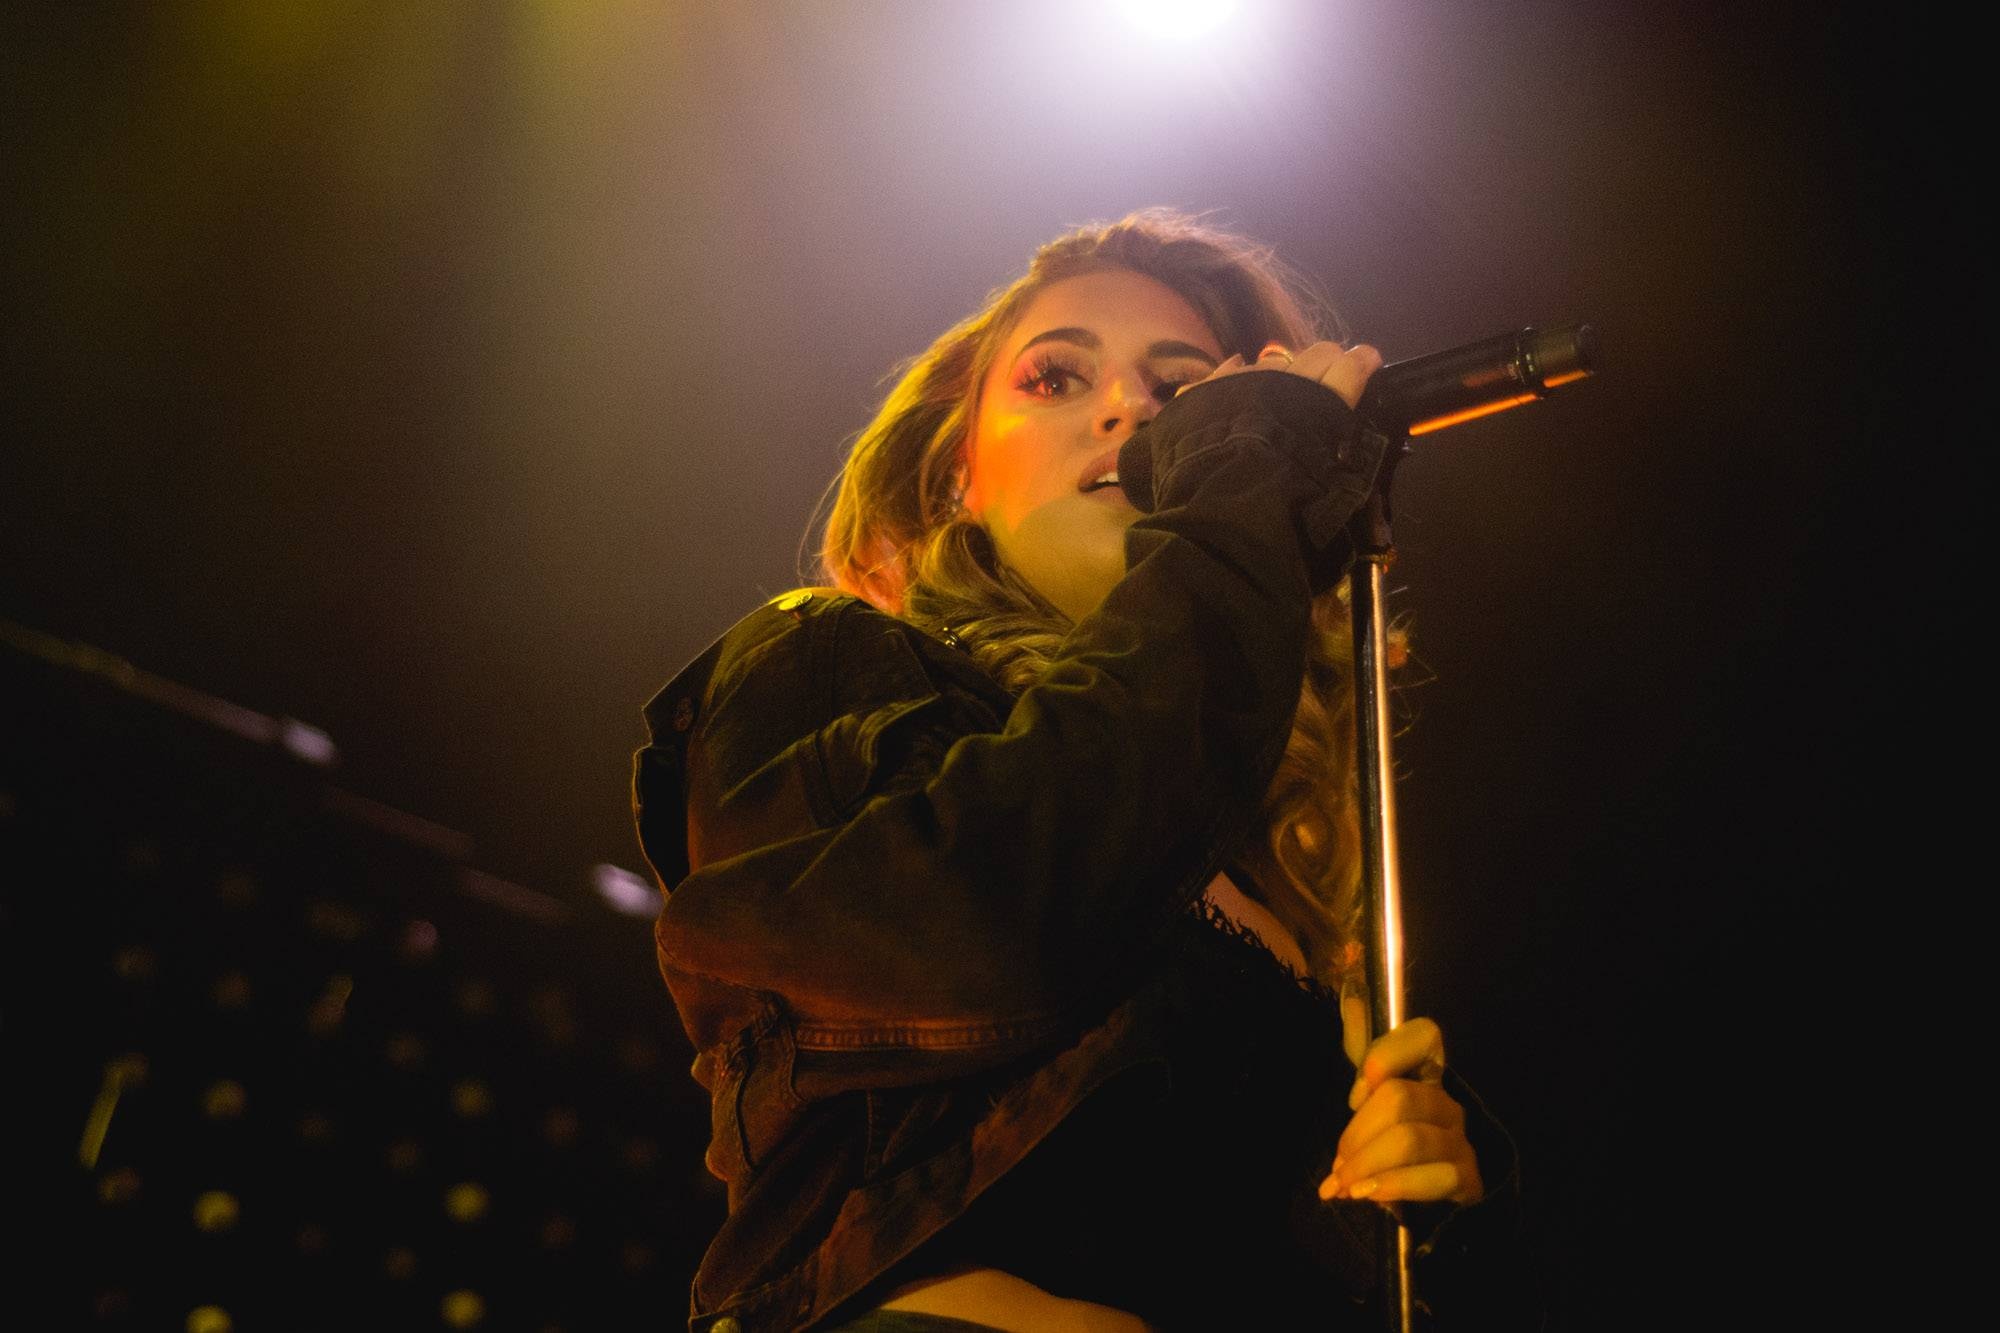 Alina Baraz on her Let's Get Lost Tour at the Imperial Theatre - photos 2000x1340